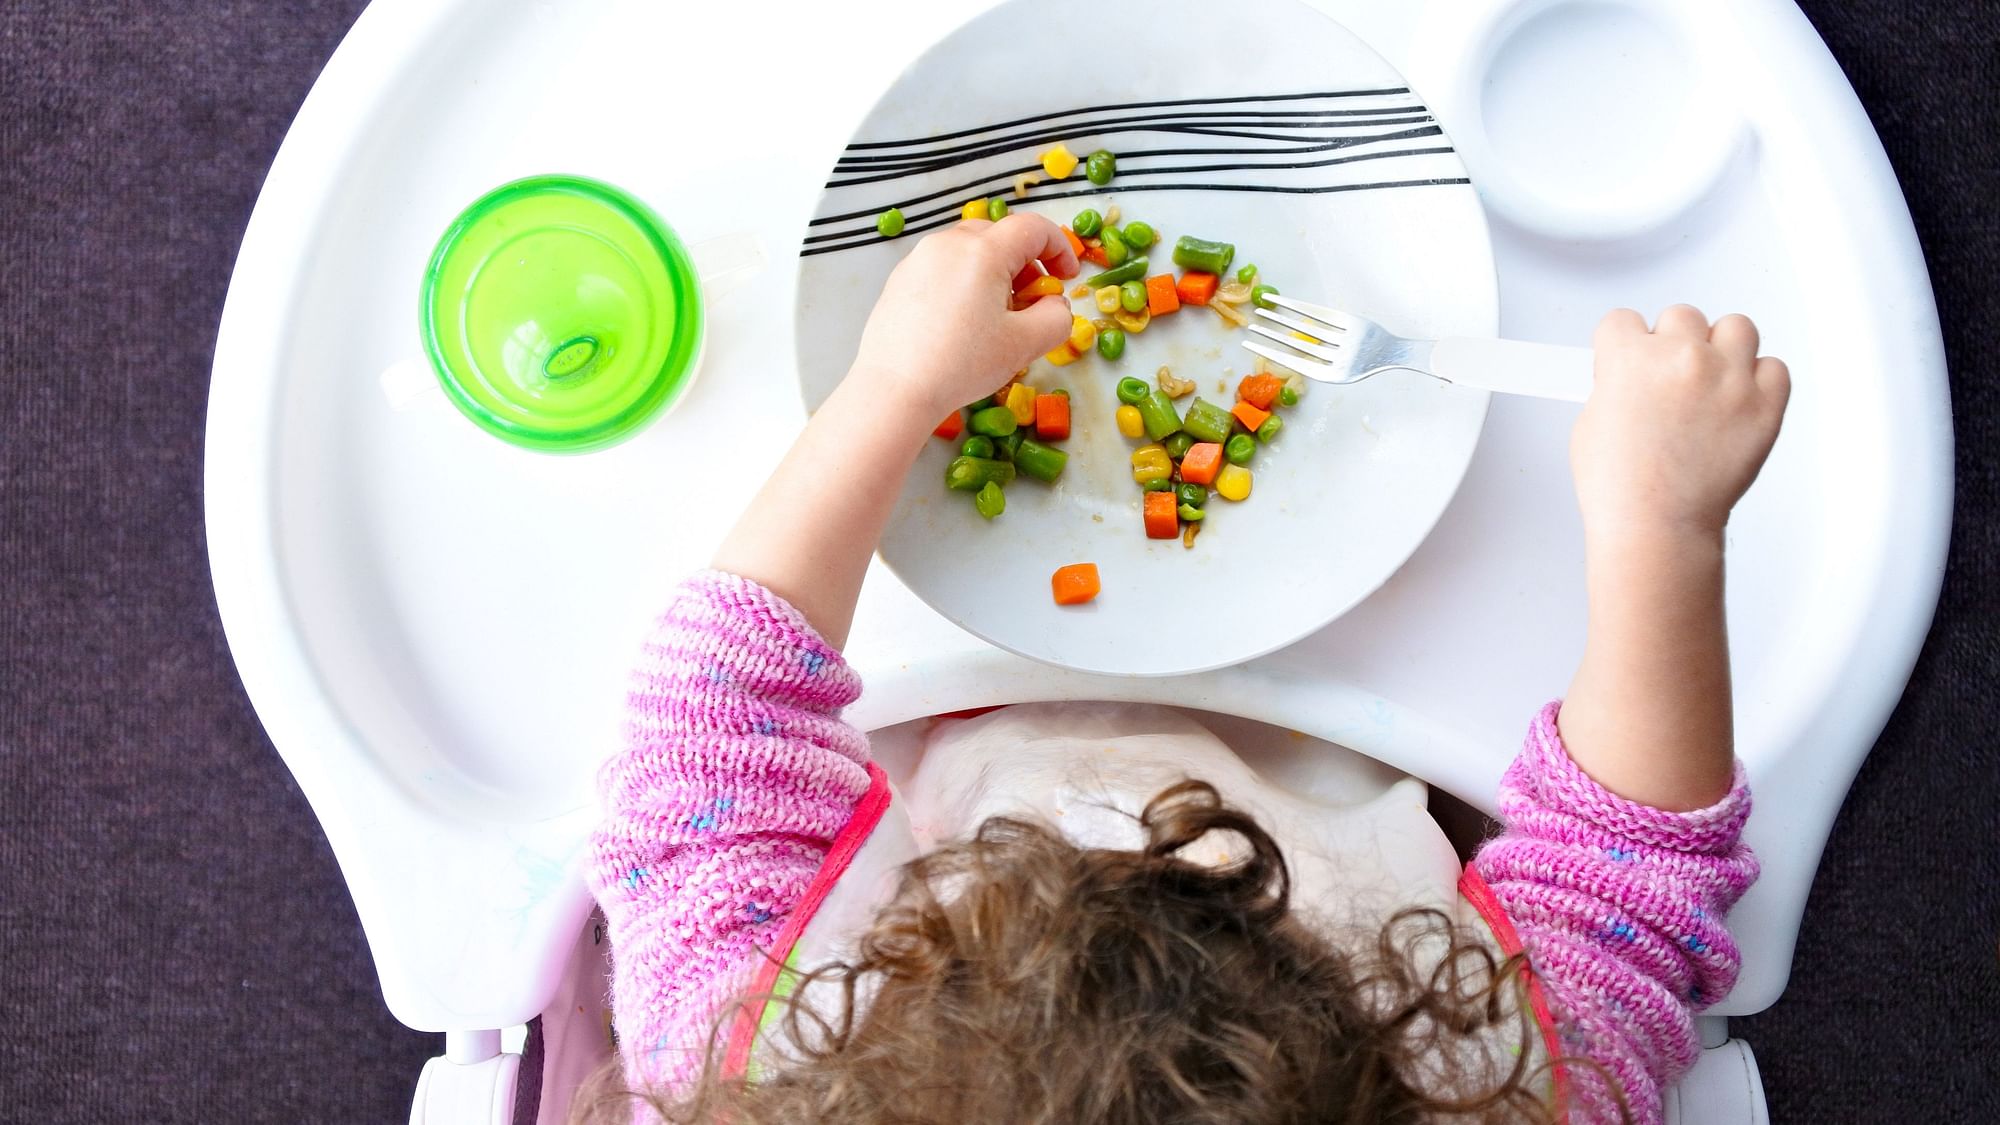 Earlier studies had found that children were more likely to eat nutrient-rich foods if they were involved in preparing the dish.